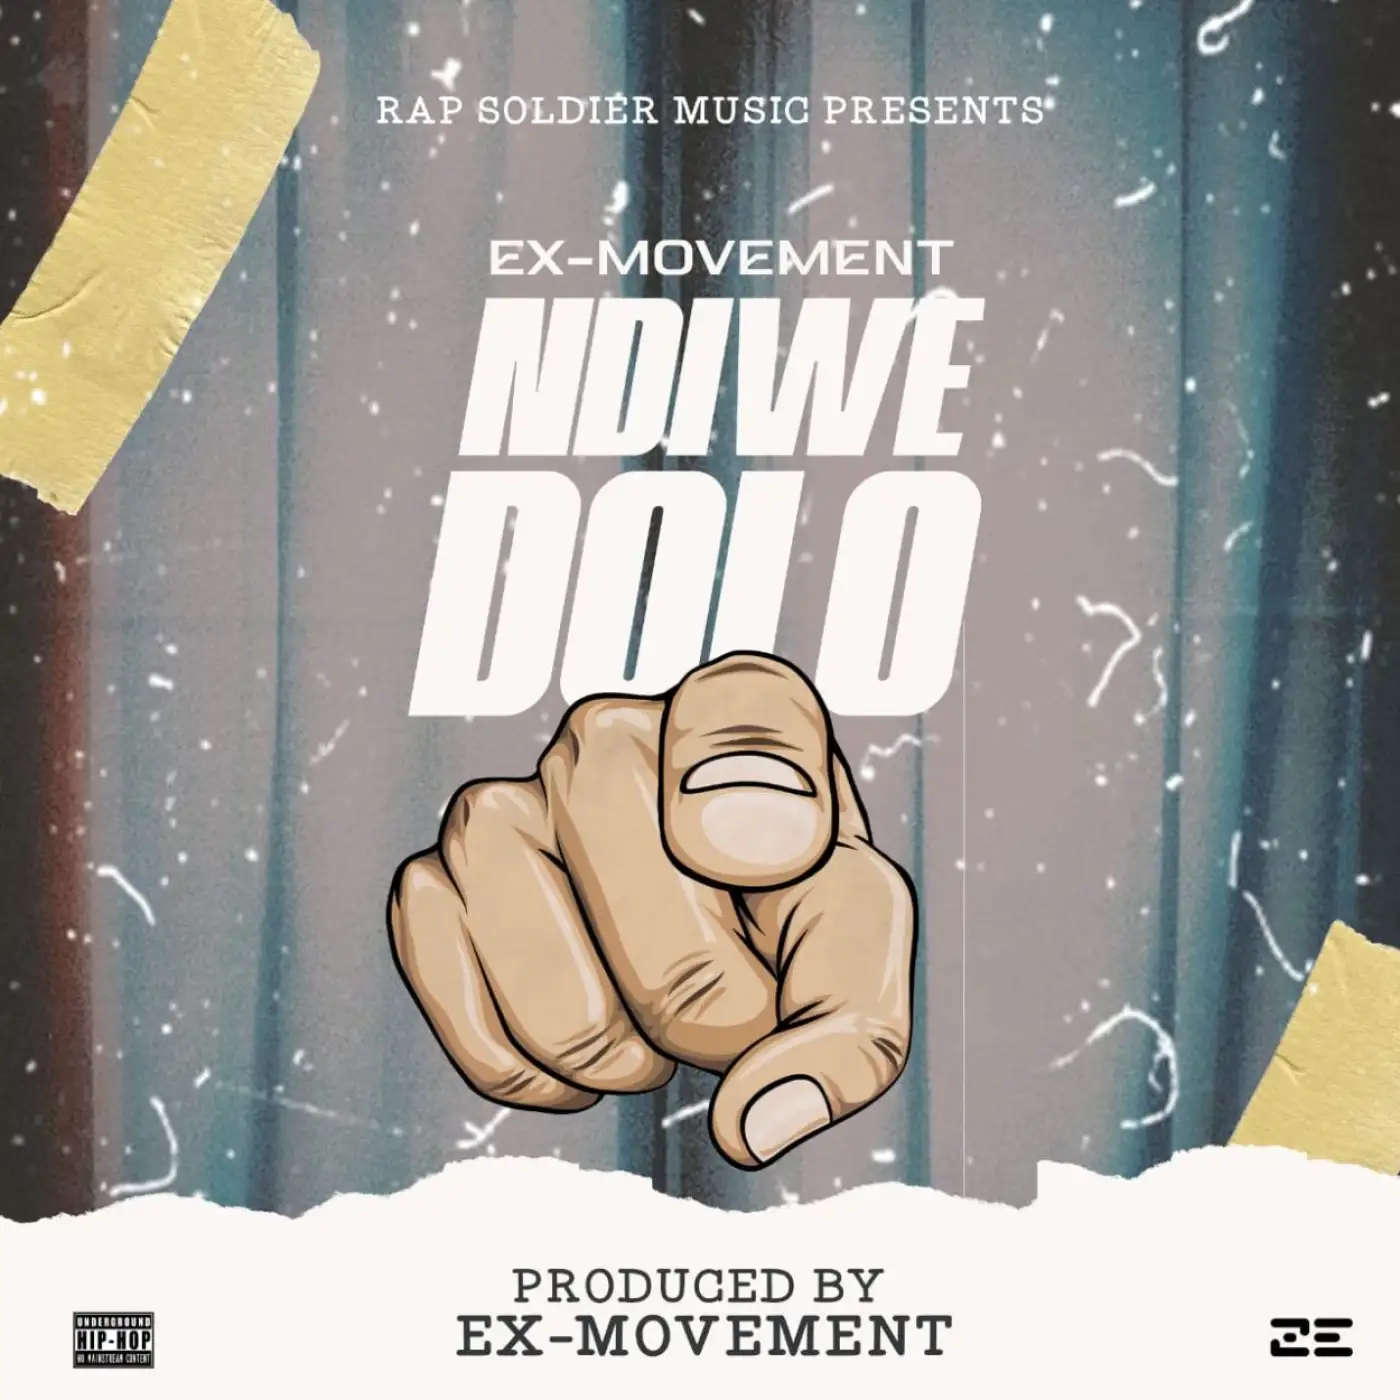 Ex-Movement-Ex-Movement - Ndiwe Dolo-song artwork cover